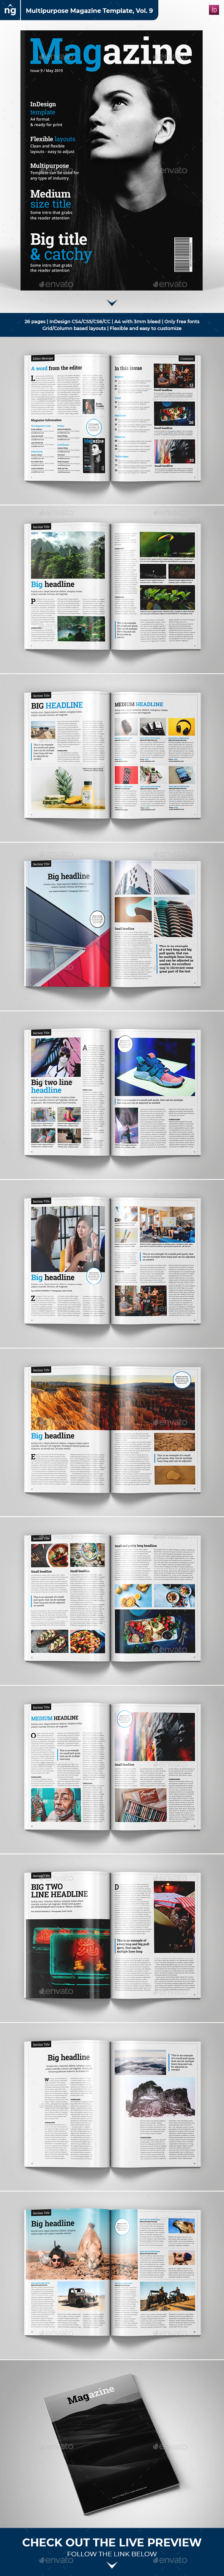 Indesign Magazine Template 26 Pages By Northgraphics Graphicriver